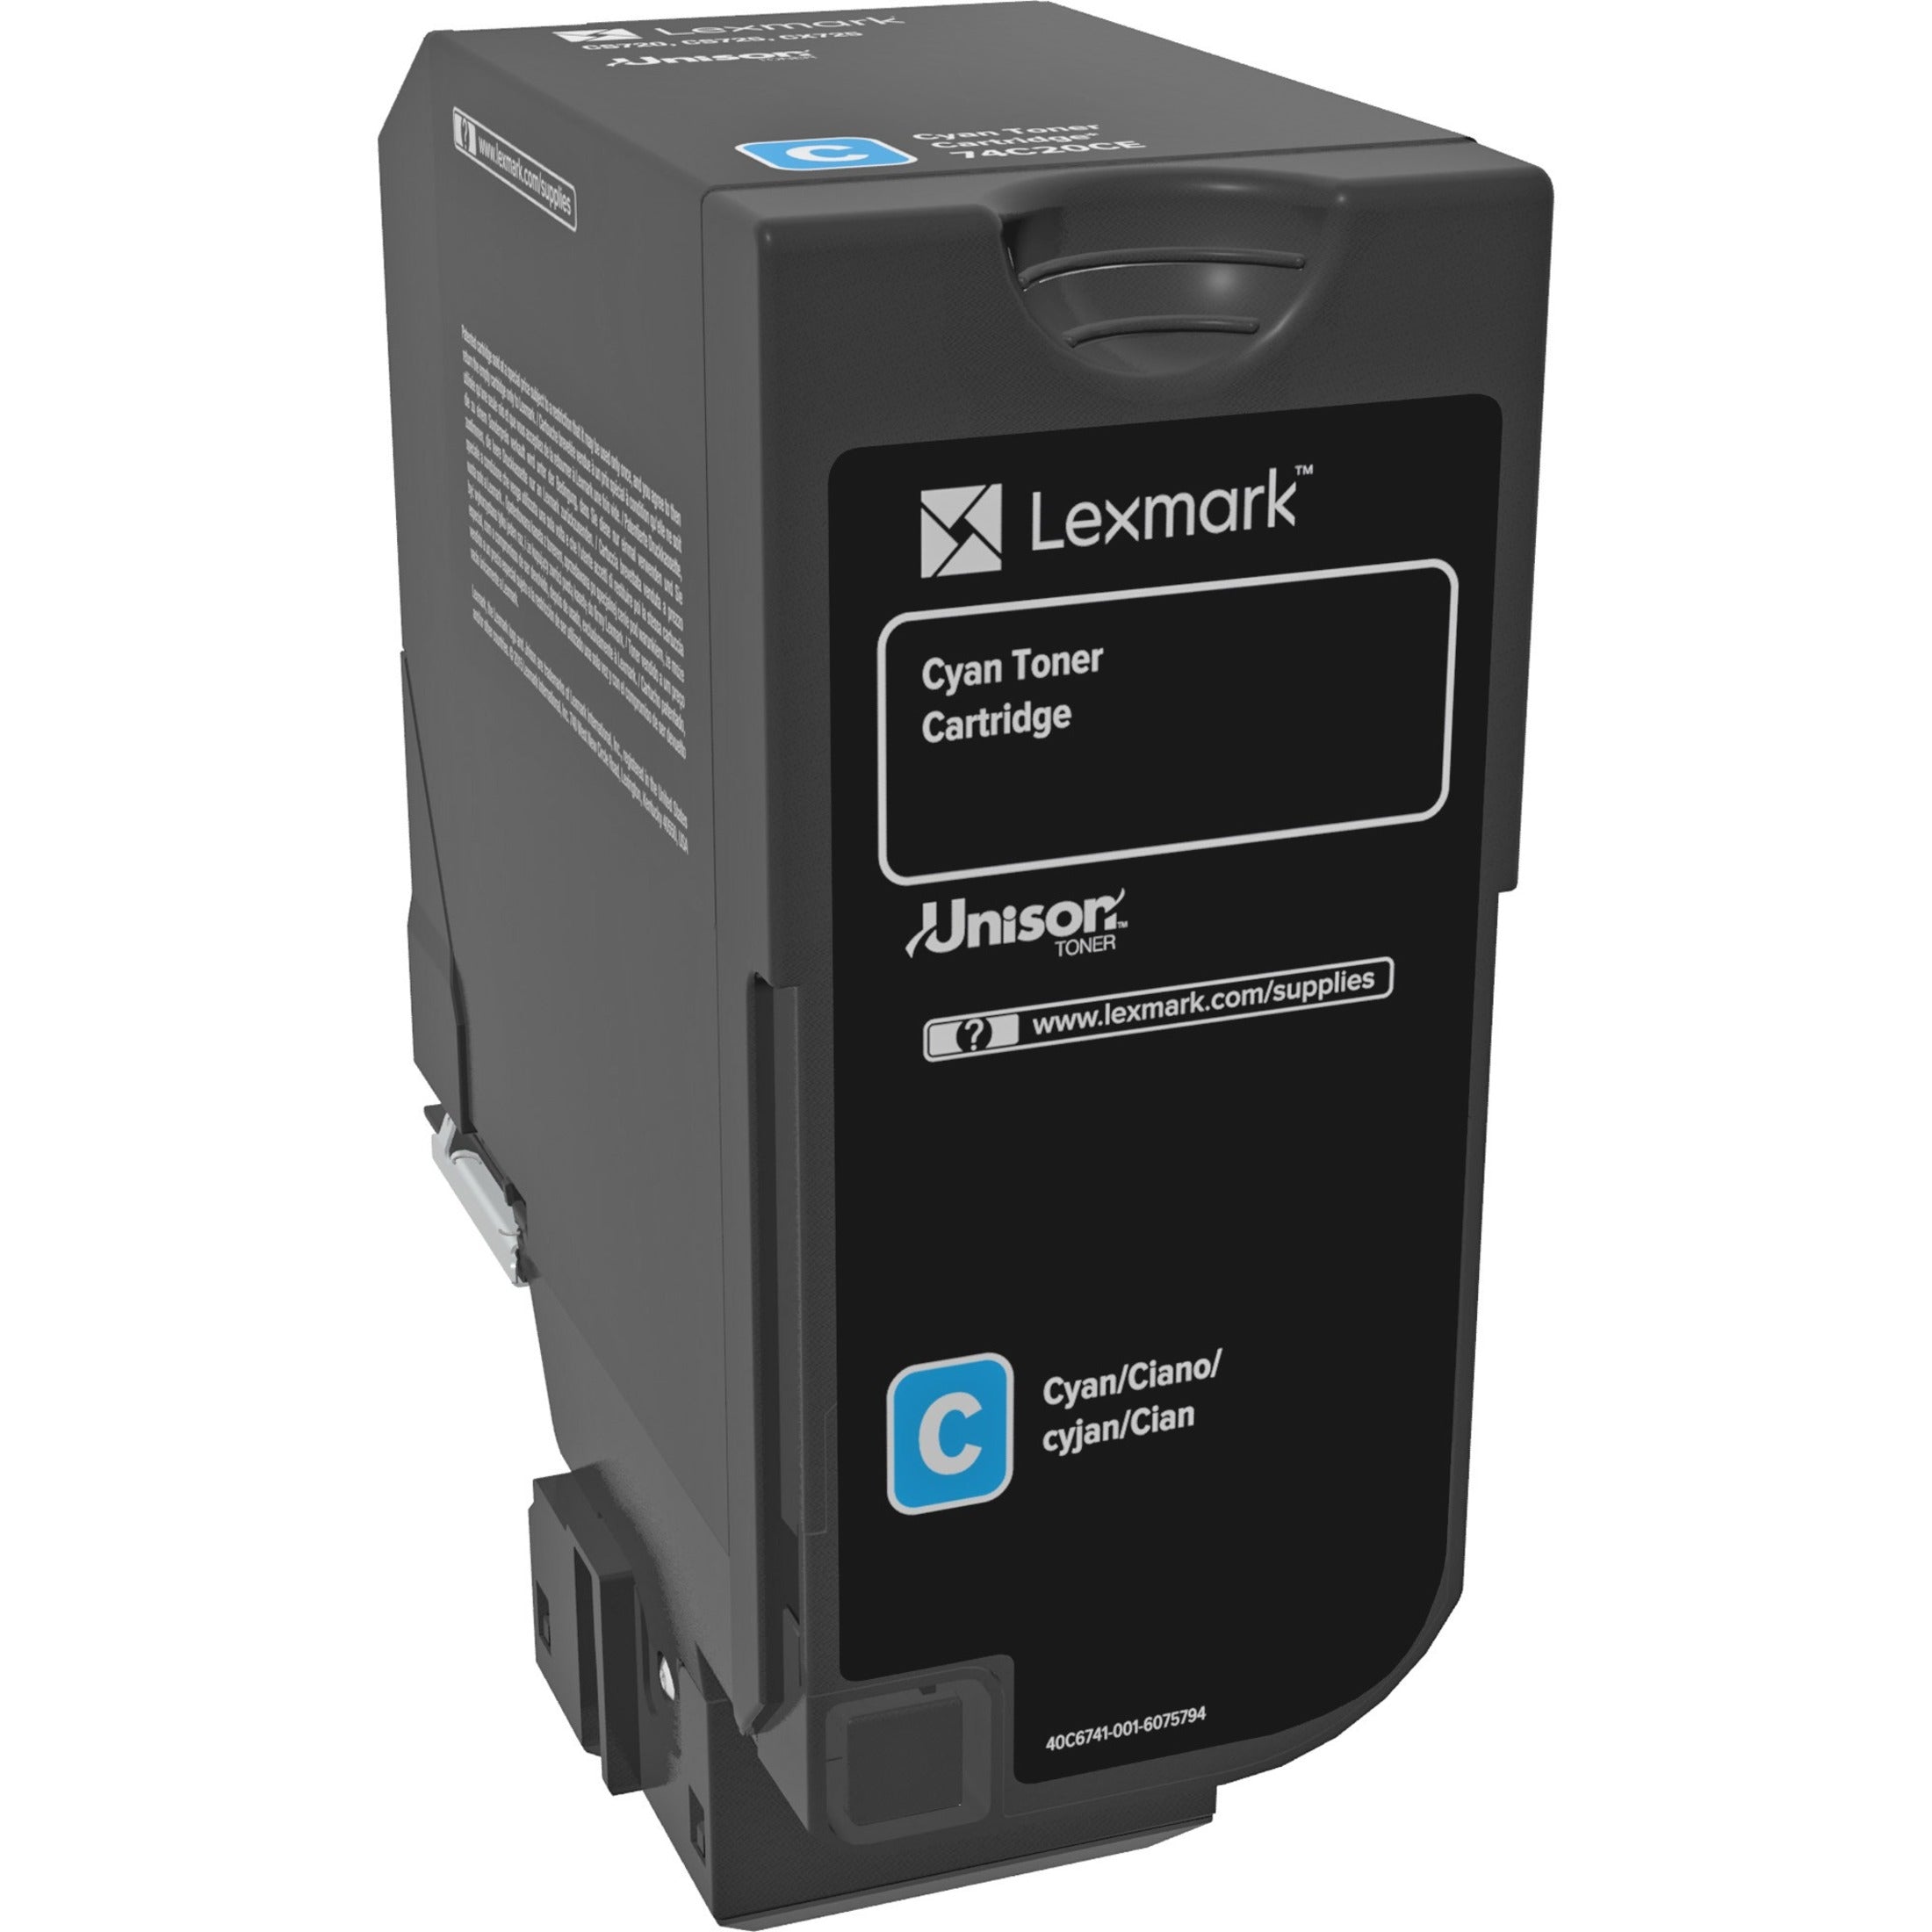 Lexmark 74C0S20 7K Cyan Toner Cartridge, for CS720, 7000 Pages Yield